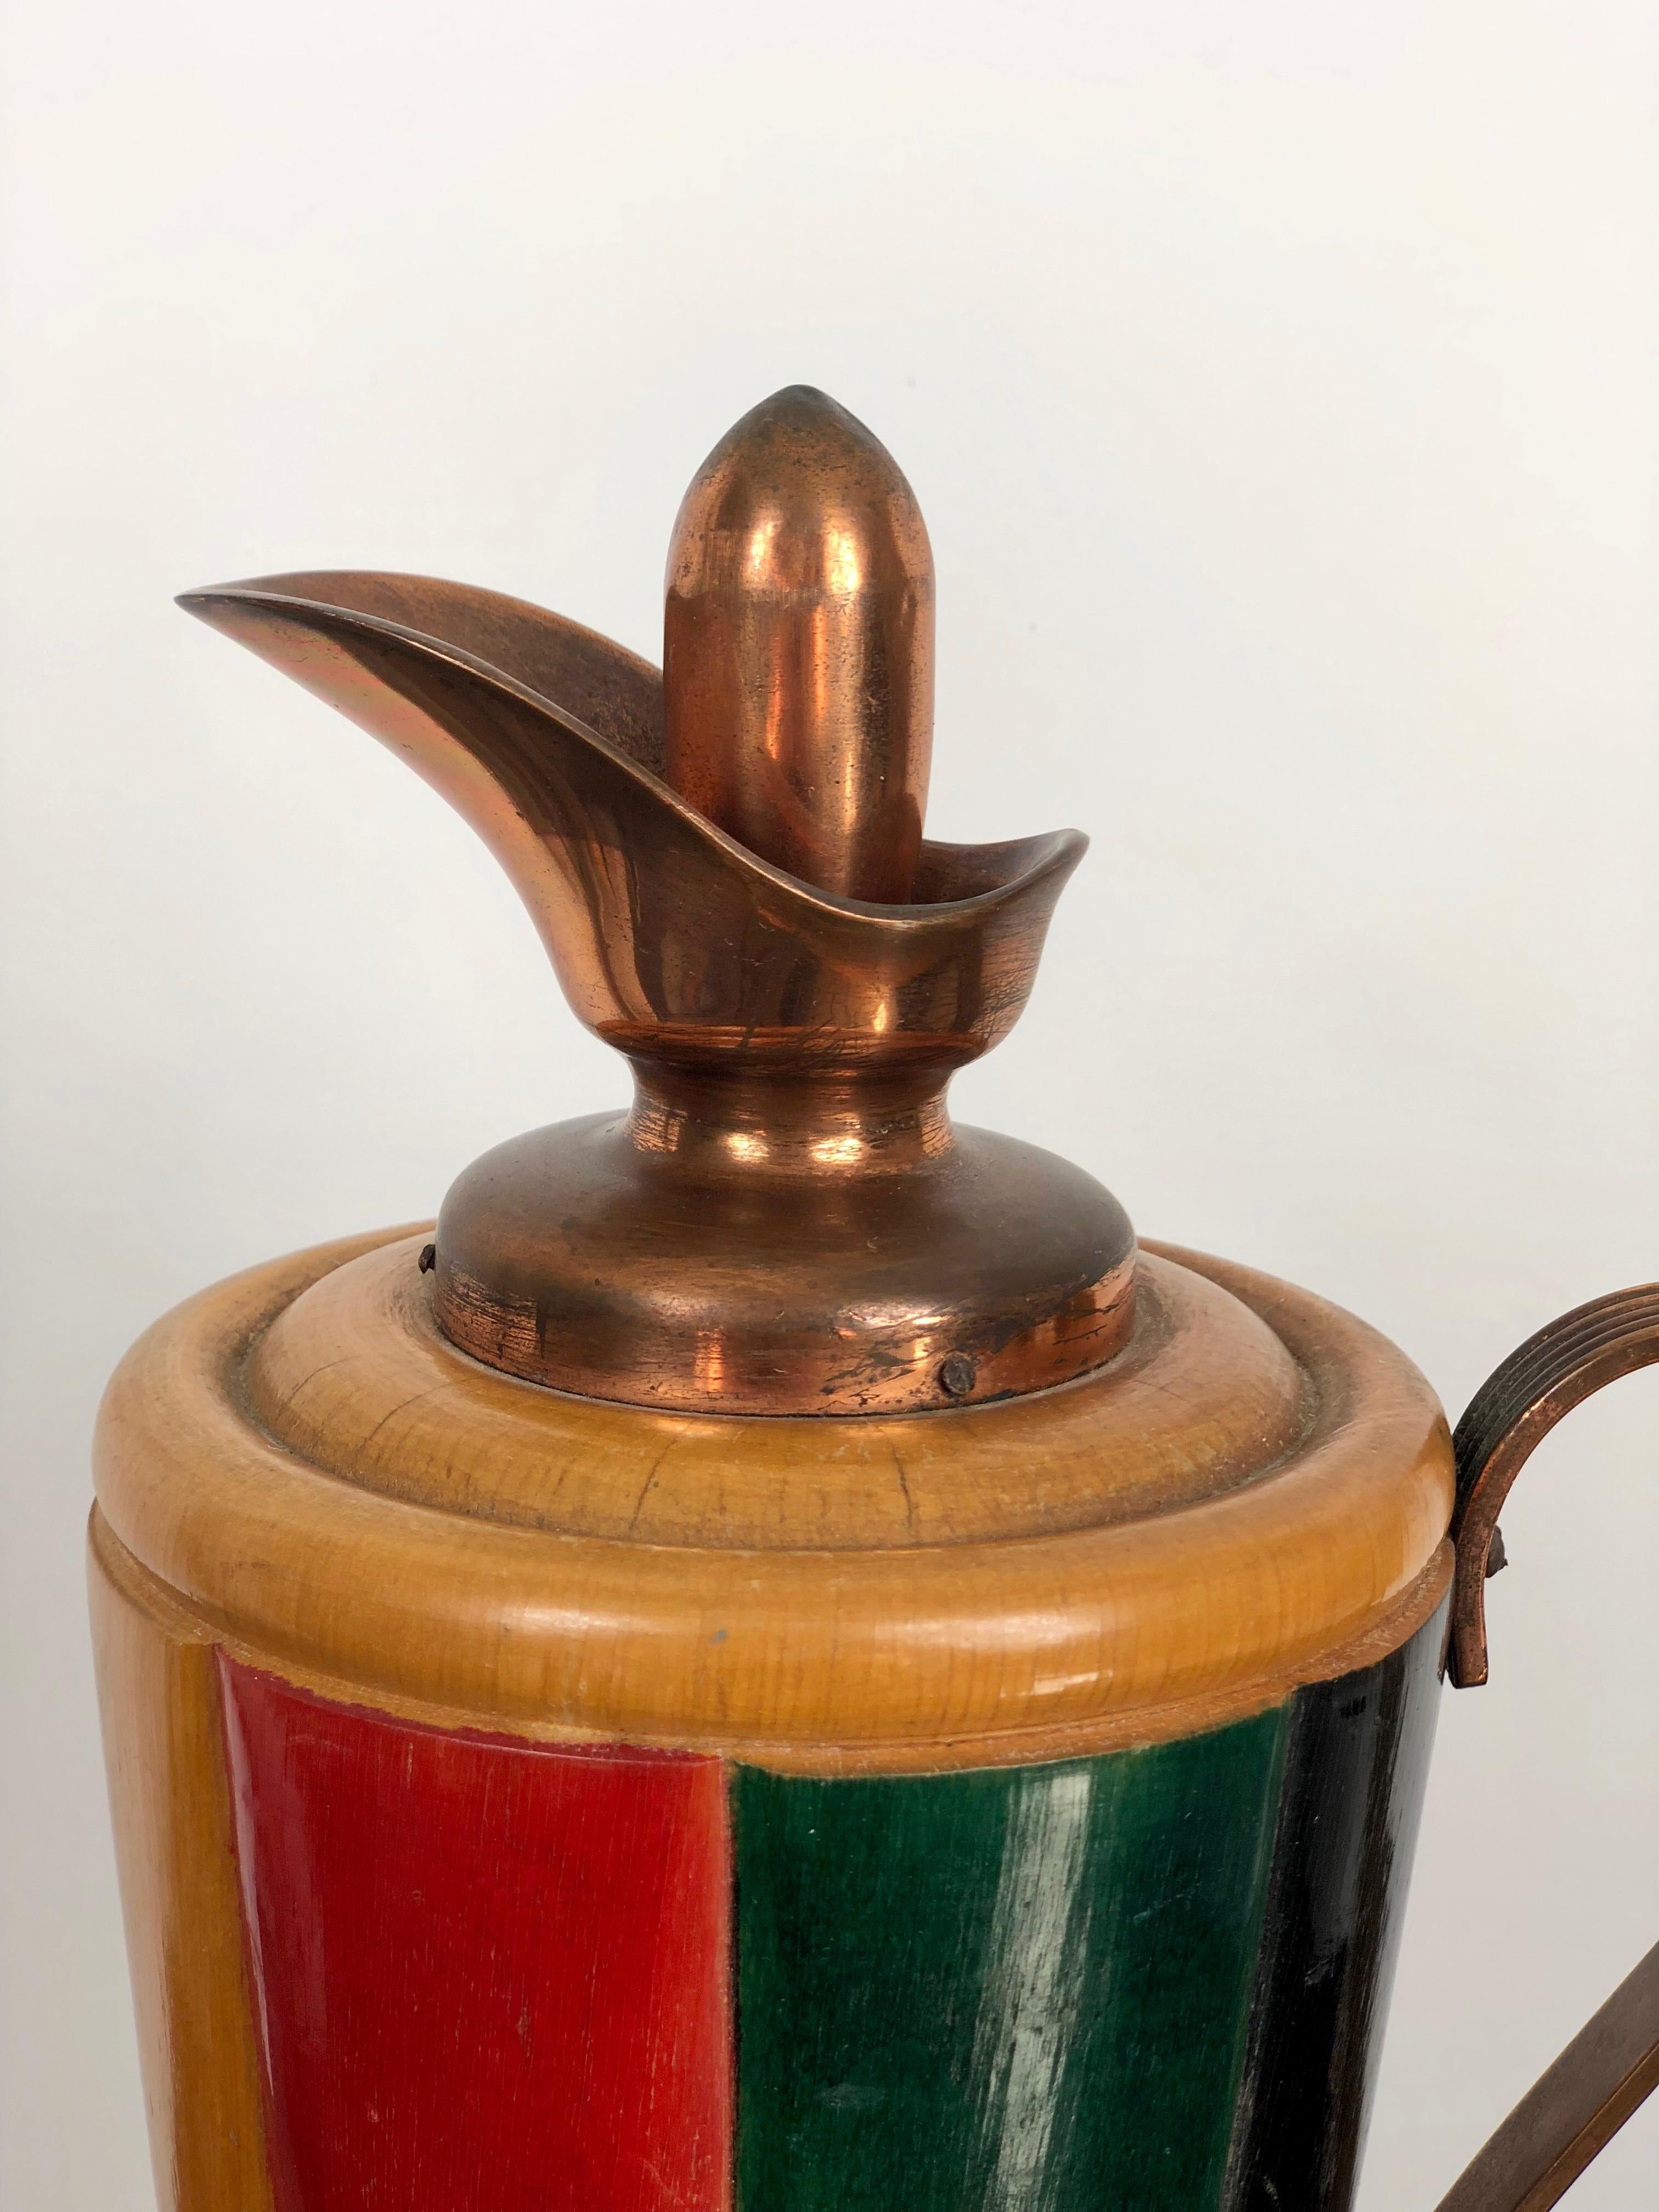 Copper and Wood Thermos Decanter Pitcher by Aldo Tura, Macabo, Italy, 1950s For Sale 2